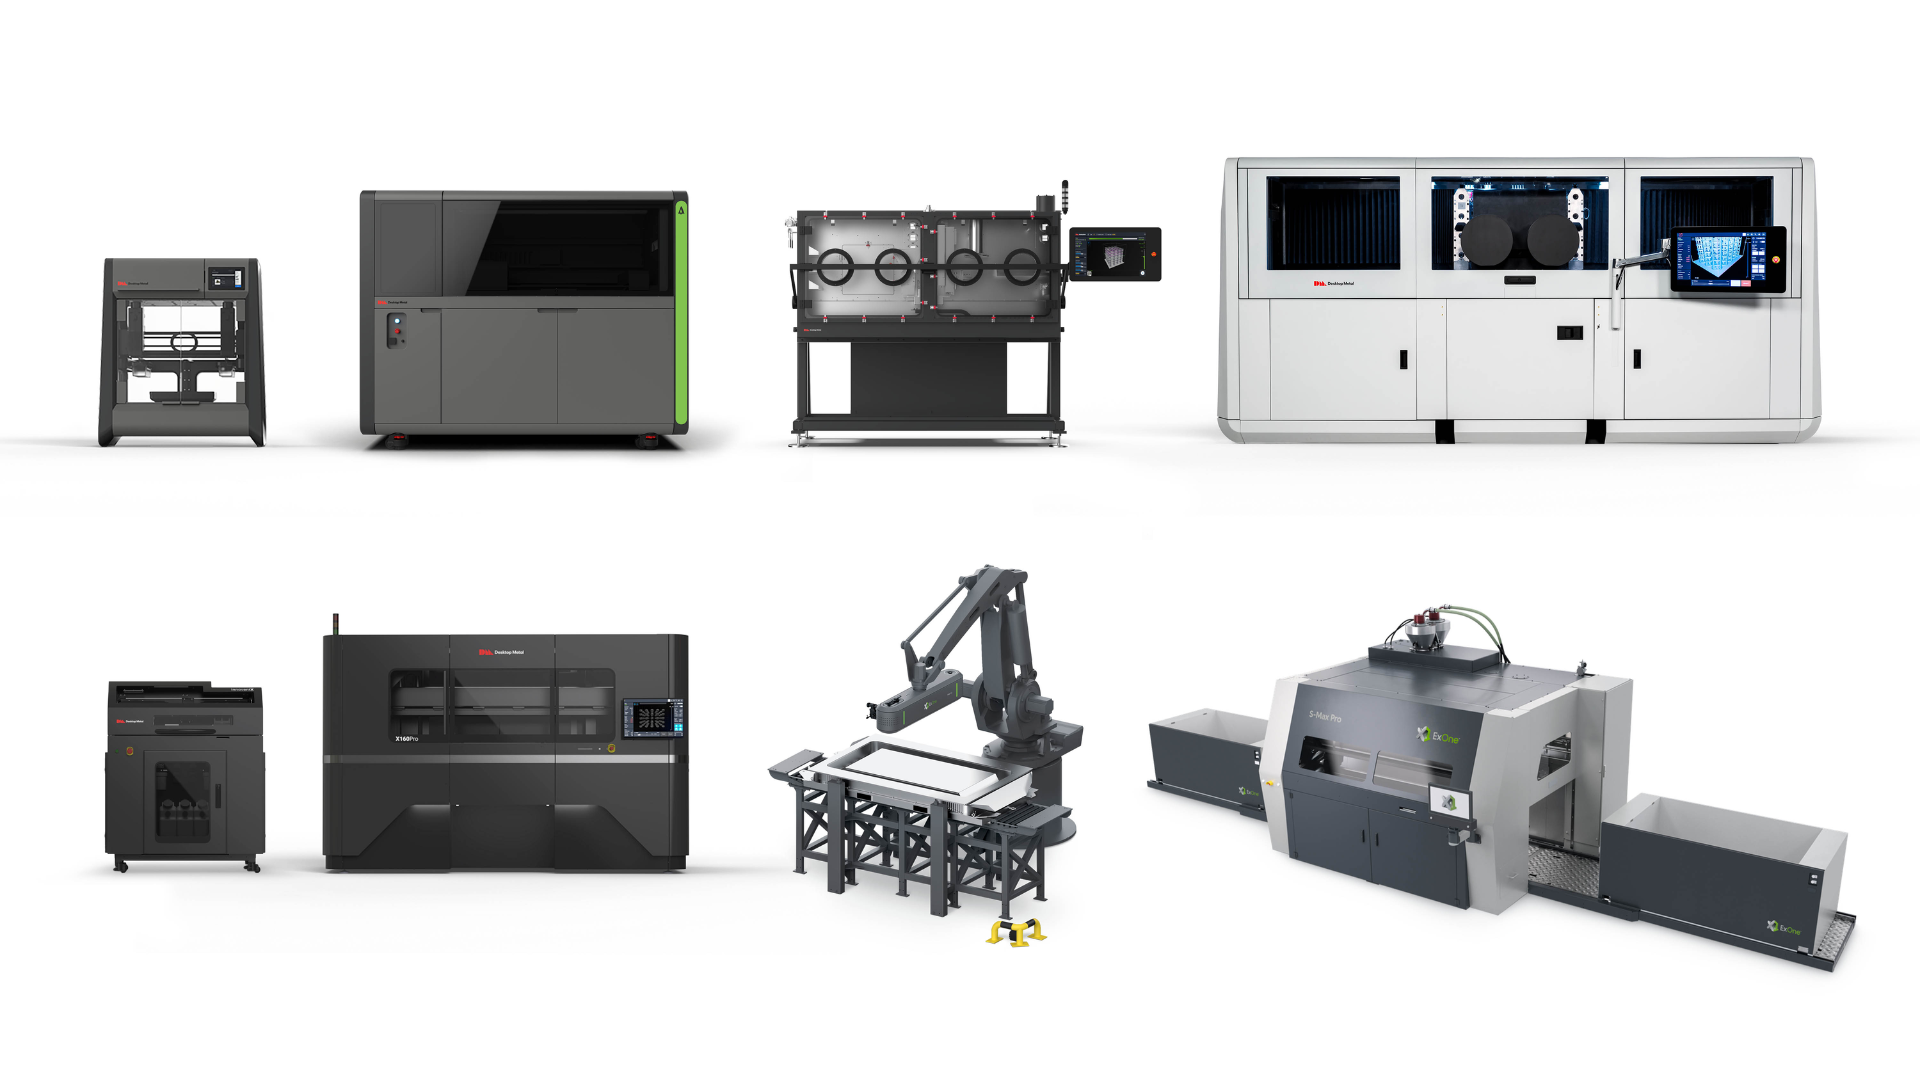 Desktop Metal announced the company has installed more than 1,100 3D printing systems for metal components worldwide.